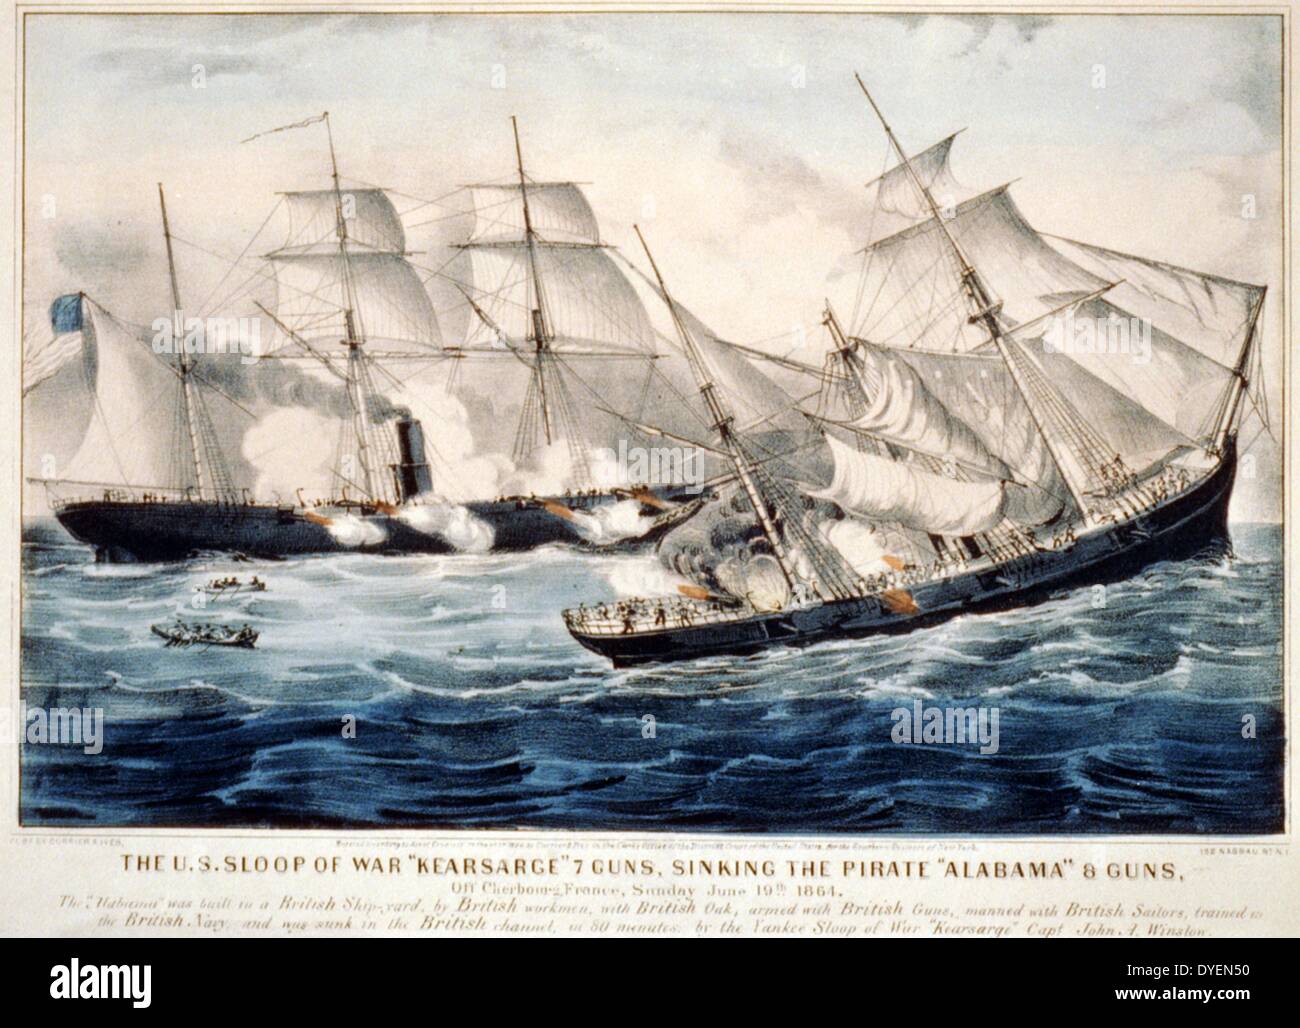 U.S. sloop of war 'Kearsarge' 7 guns, sinking the pirate 'Alabama' 8 guns: off Cherbourg, France, Sunday June 19th. 1864. Illustration by Currier & Ives. c1864. Stock Photo